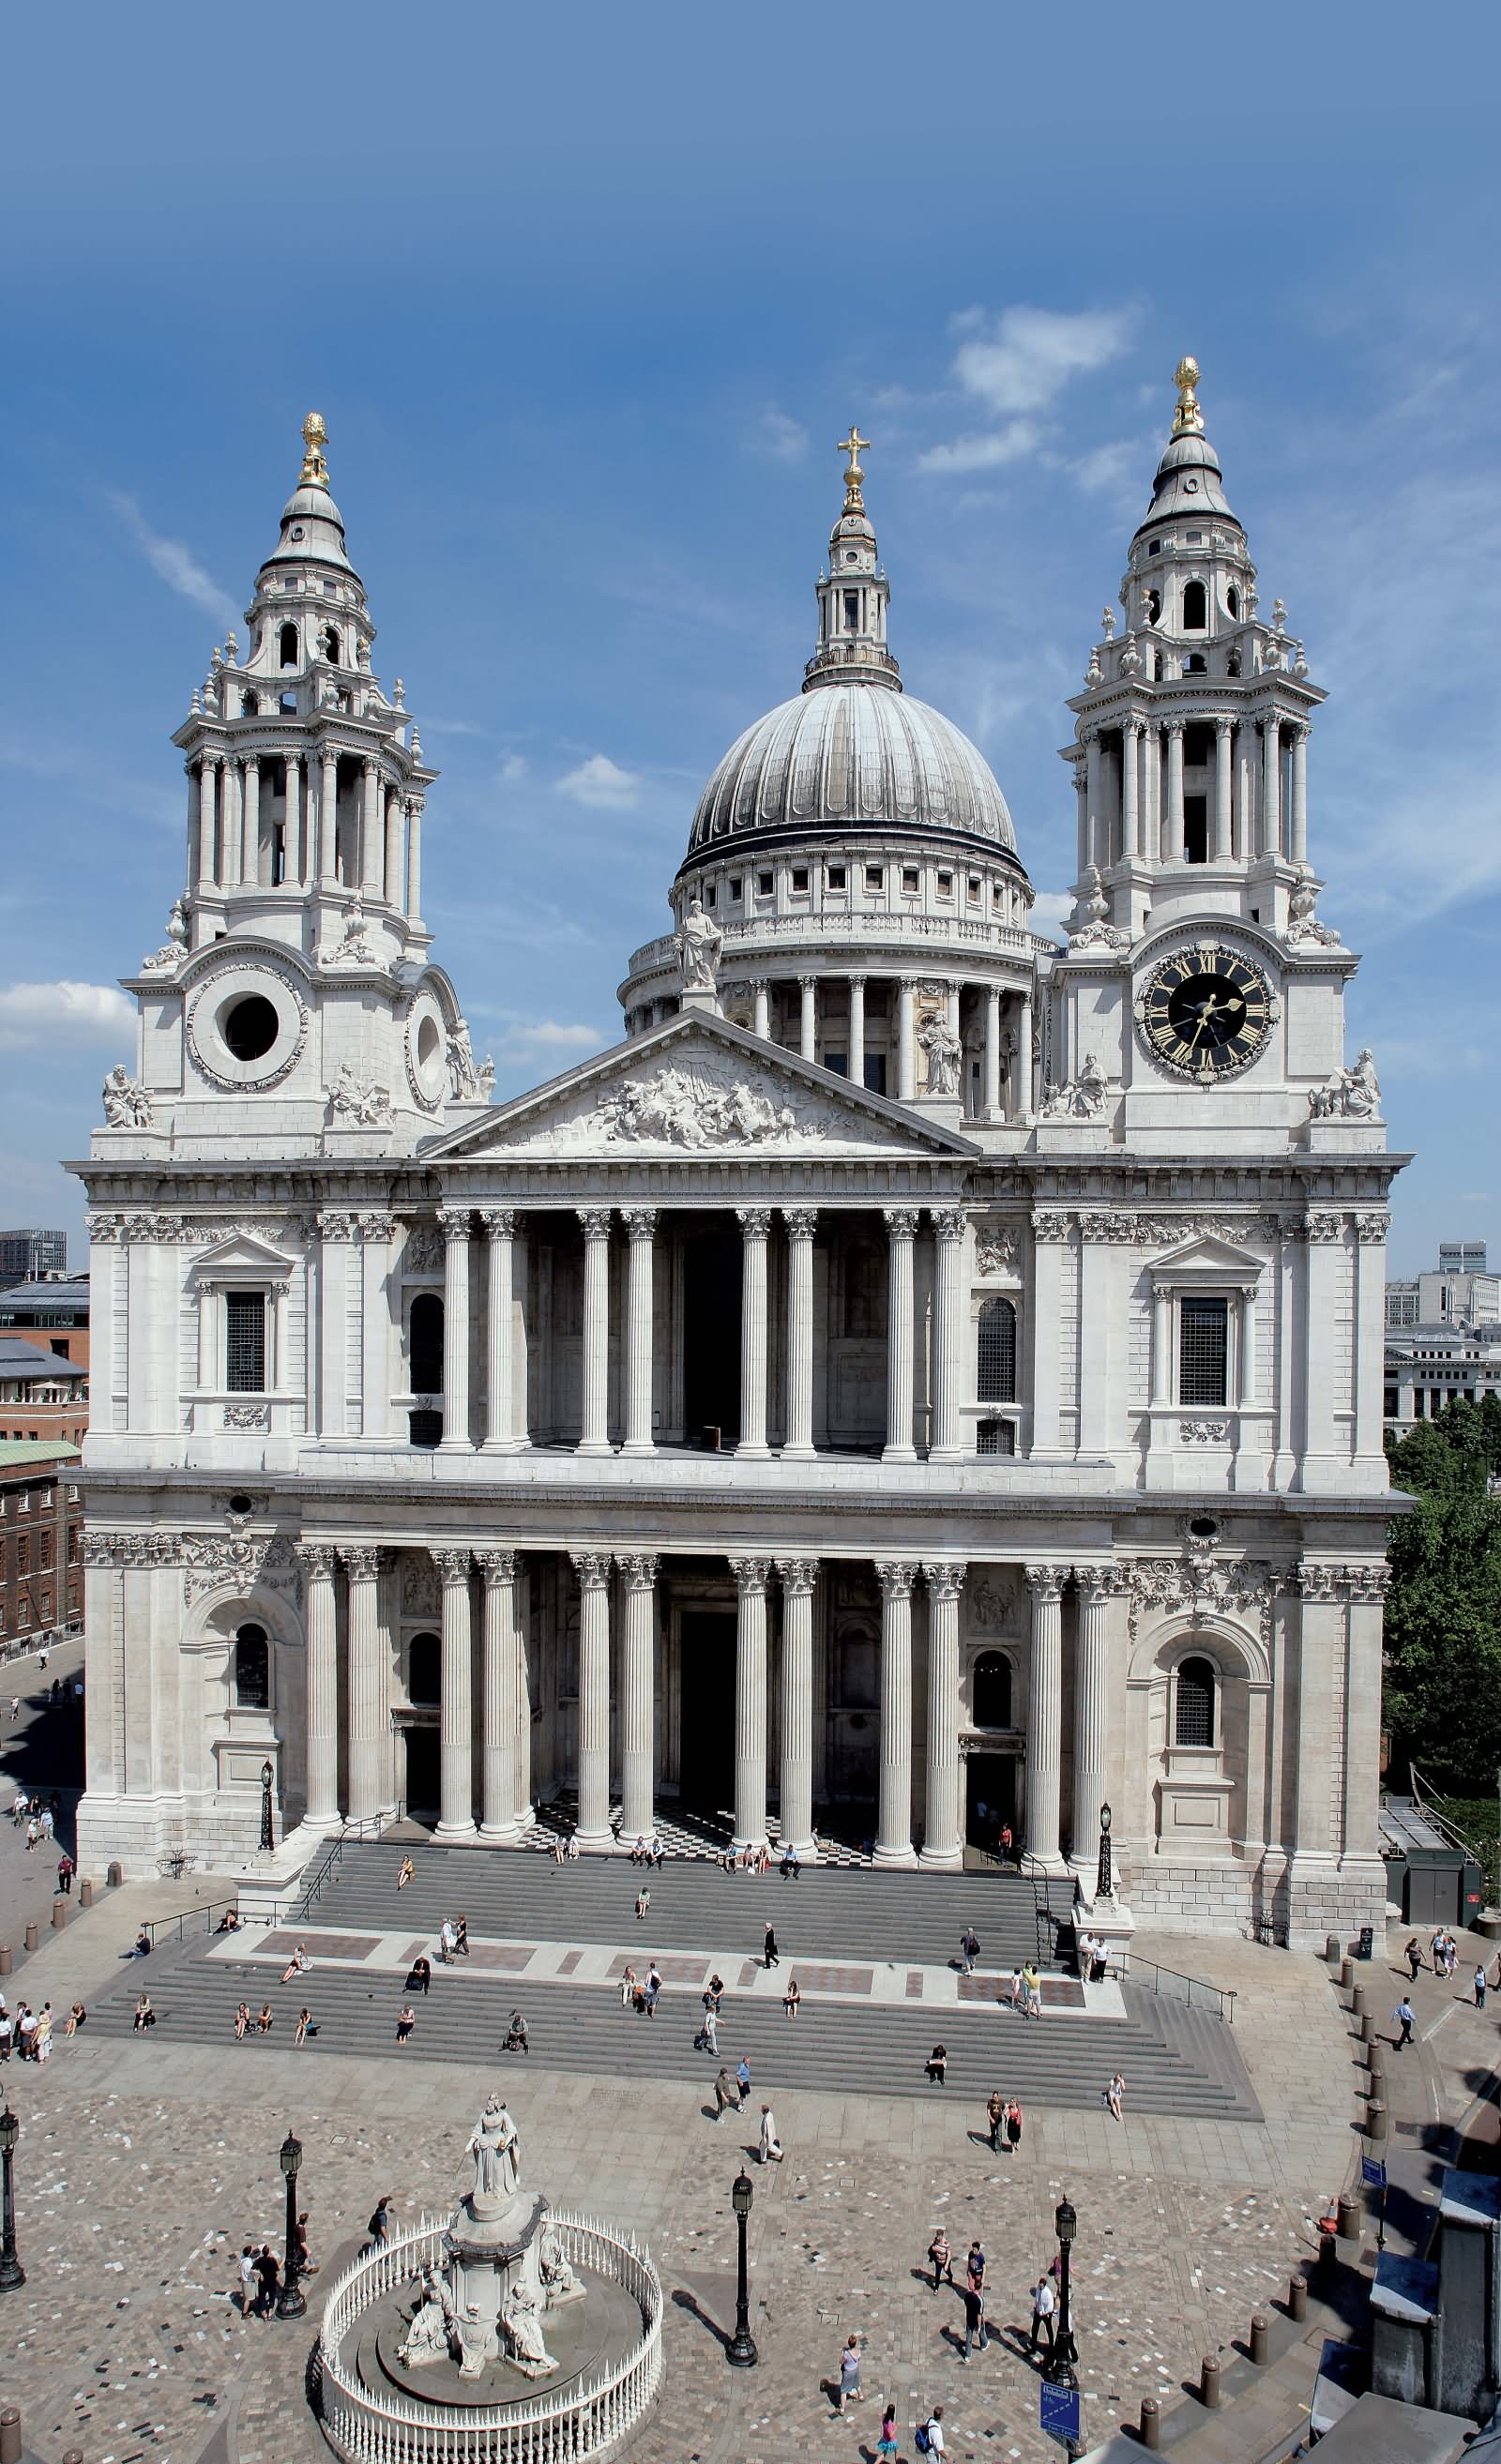 The West Facade Of The St Paul's Cathedral